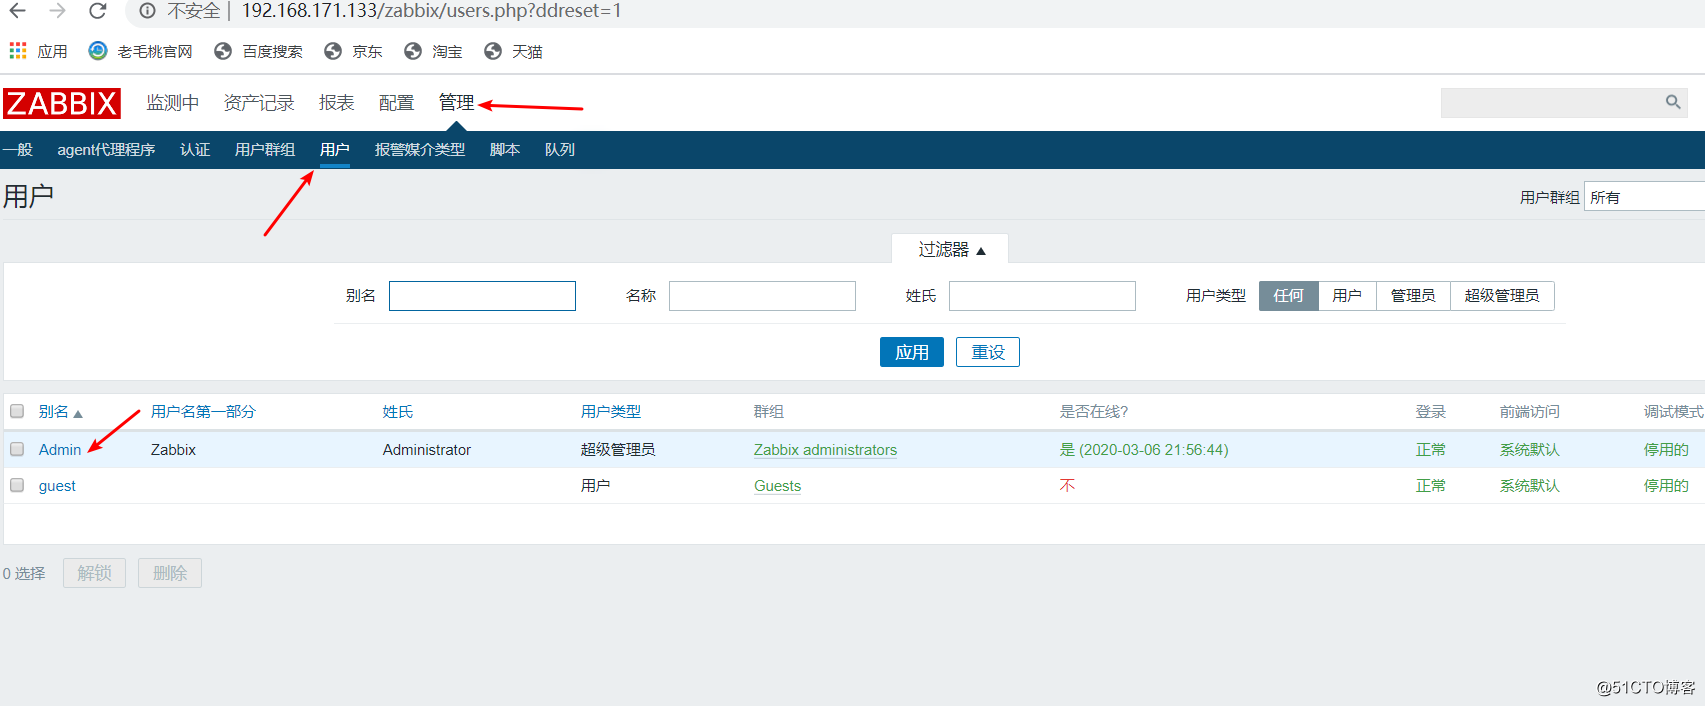 Zabbix monitoring and implementation of e-mail clients, micro-channel alarm